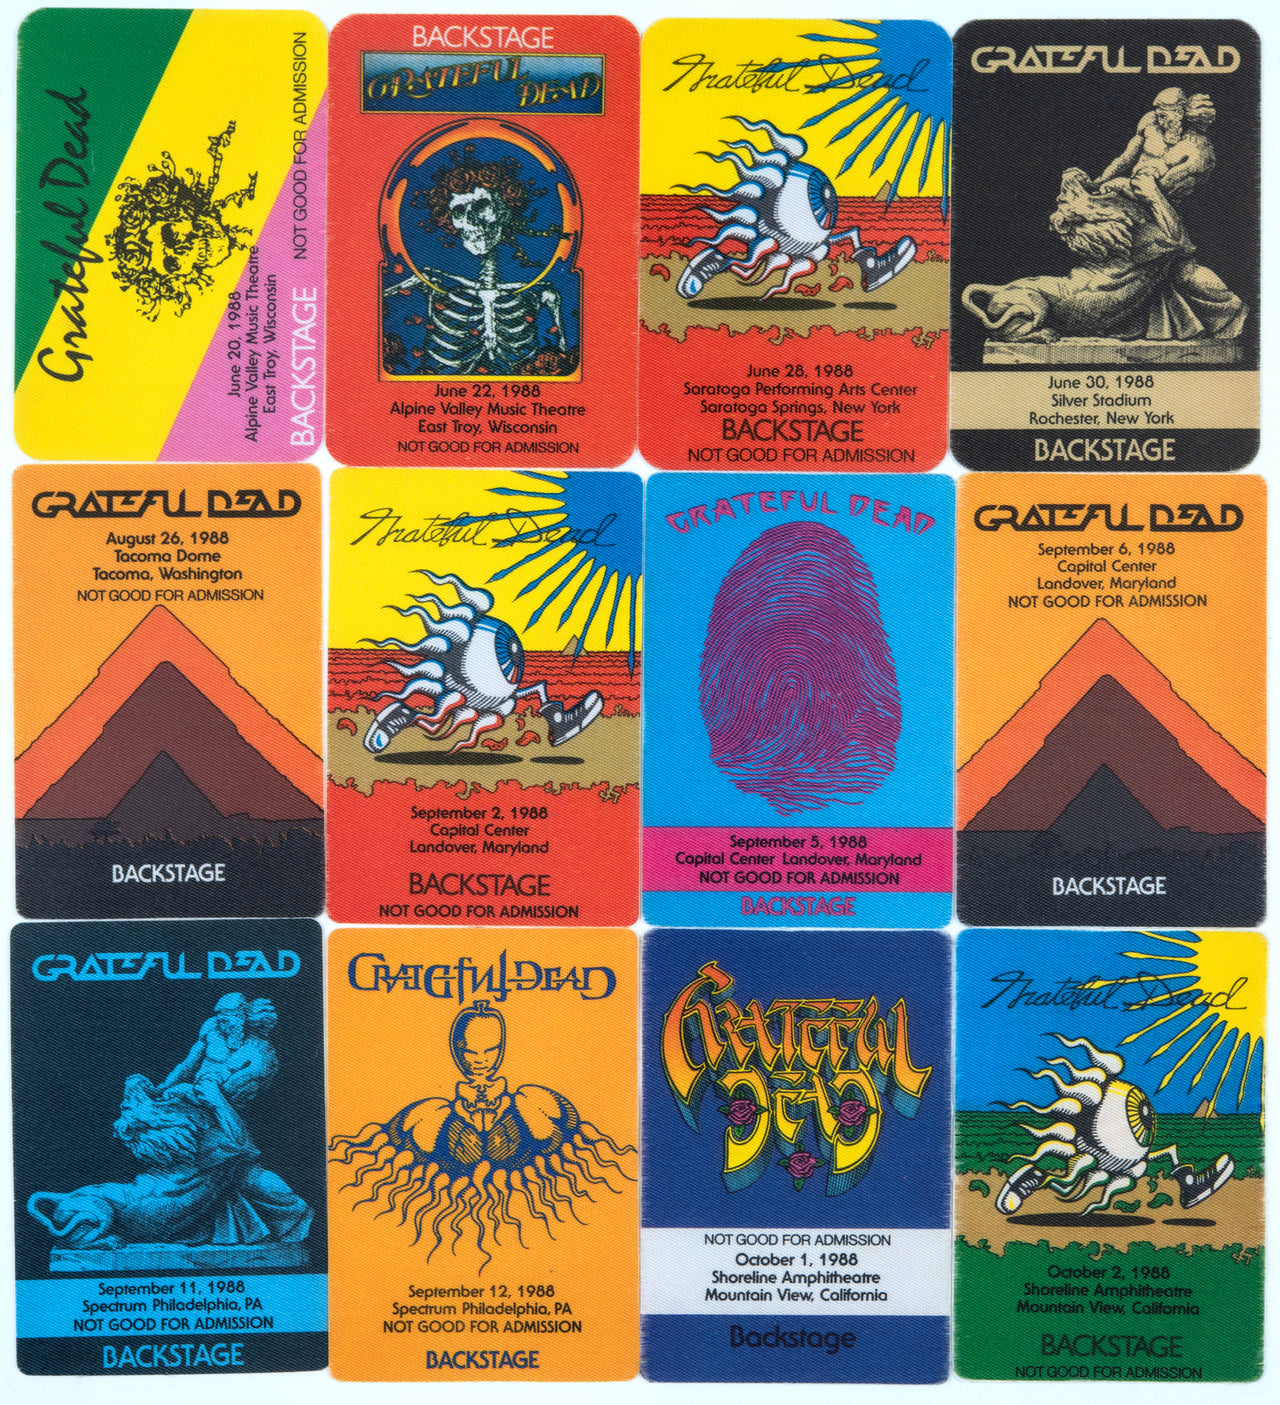 Grateful Dead Backstage Passes (6/20/1988 - 10/2/1988) from Dan Healy